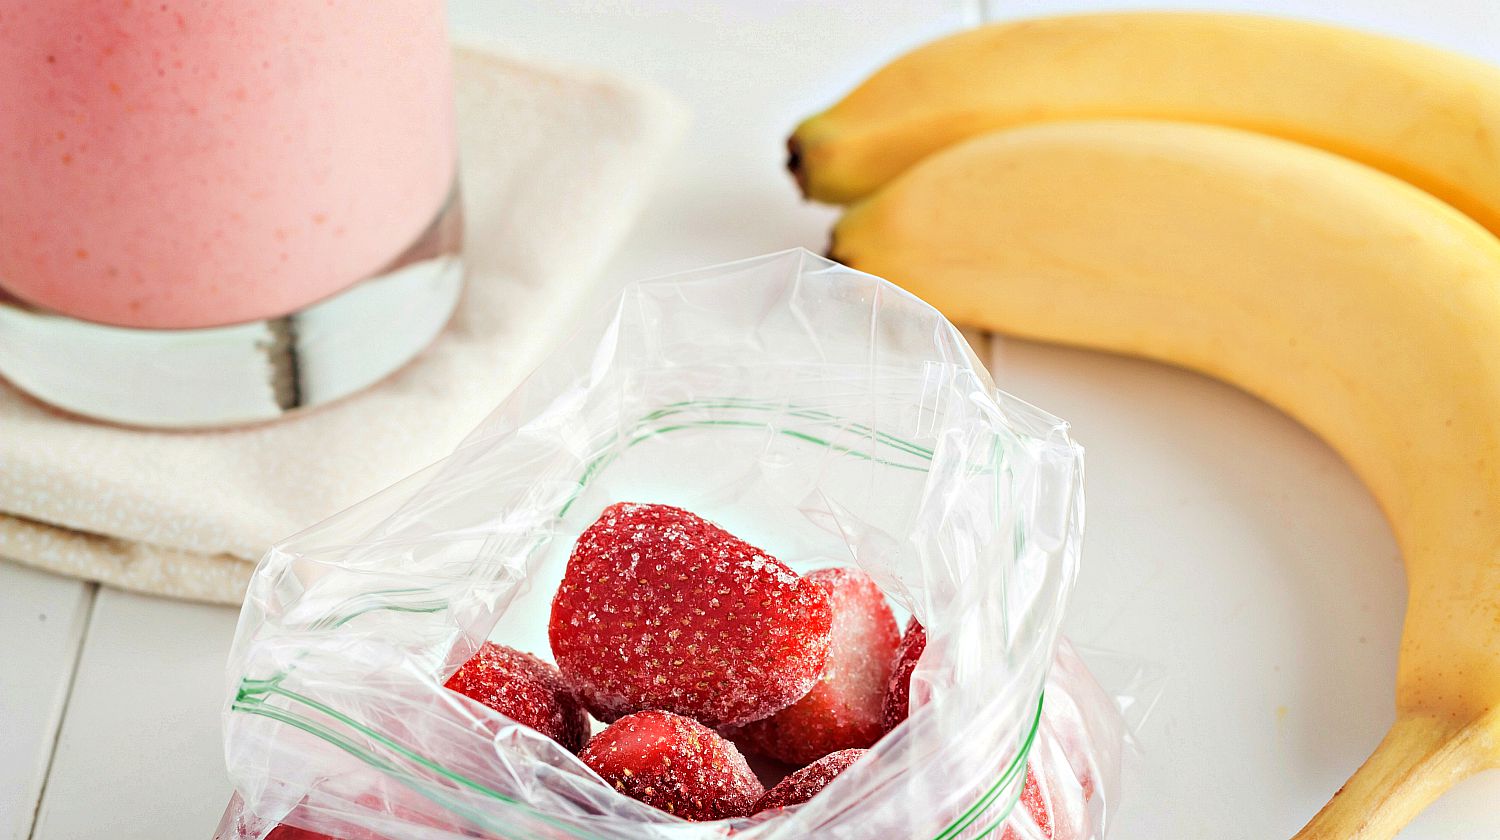 Feature | A smoothie ingredient frozen strawberries in clear plastic bag | DIY Smoothie Freezer Kits | Make Ahead Smoothie Recipes